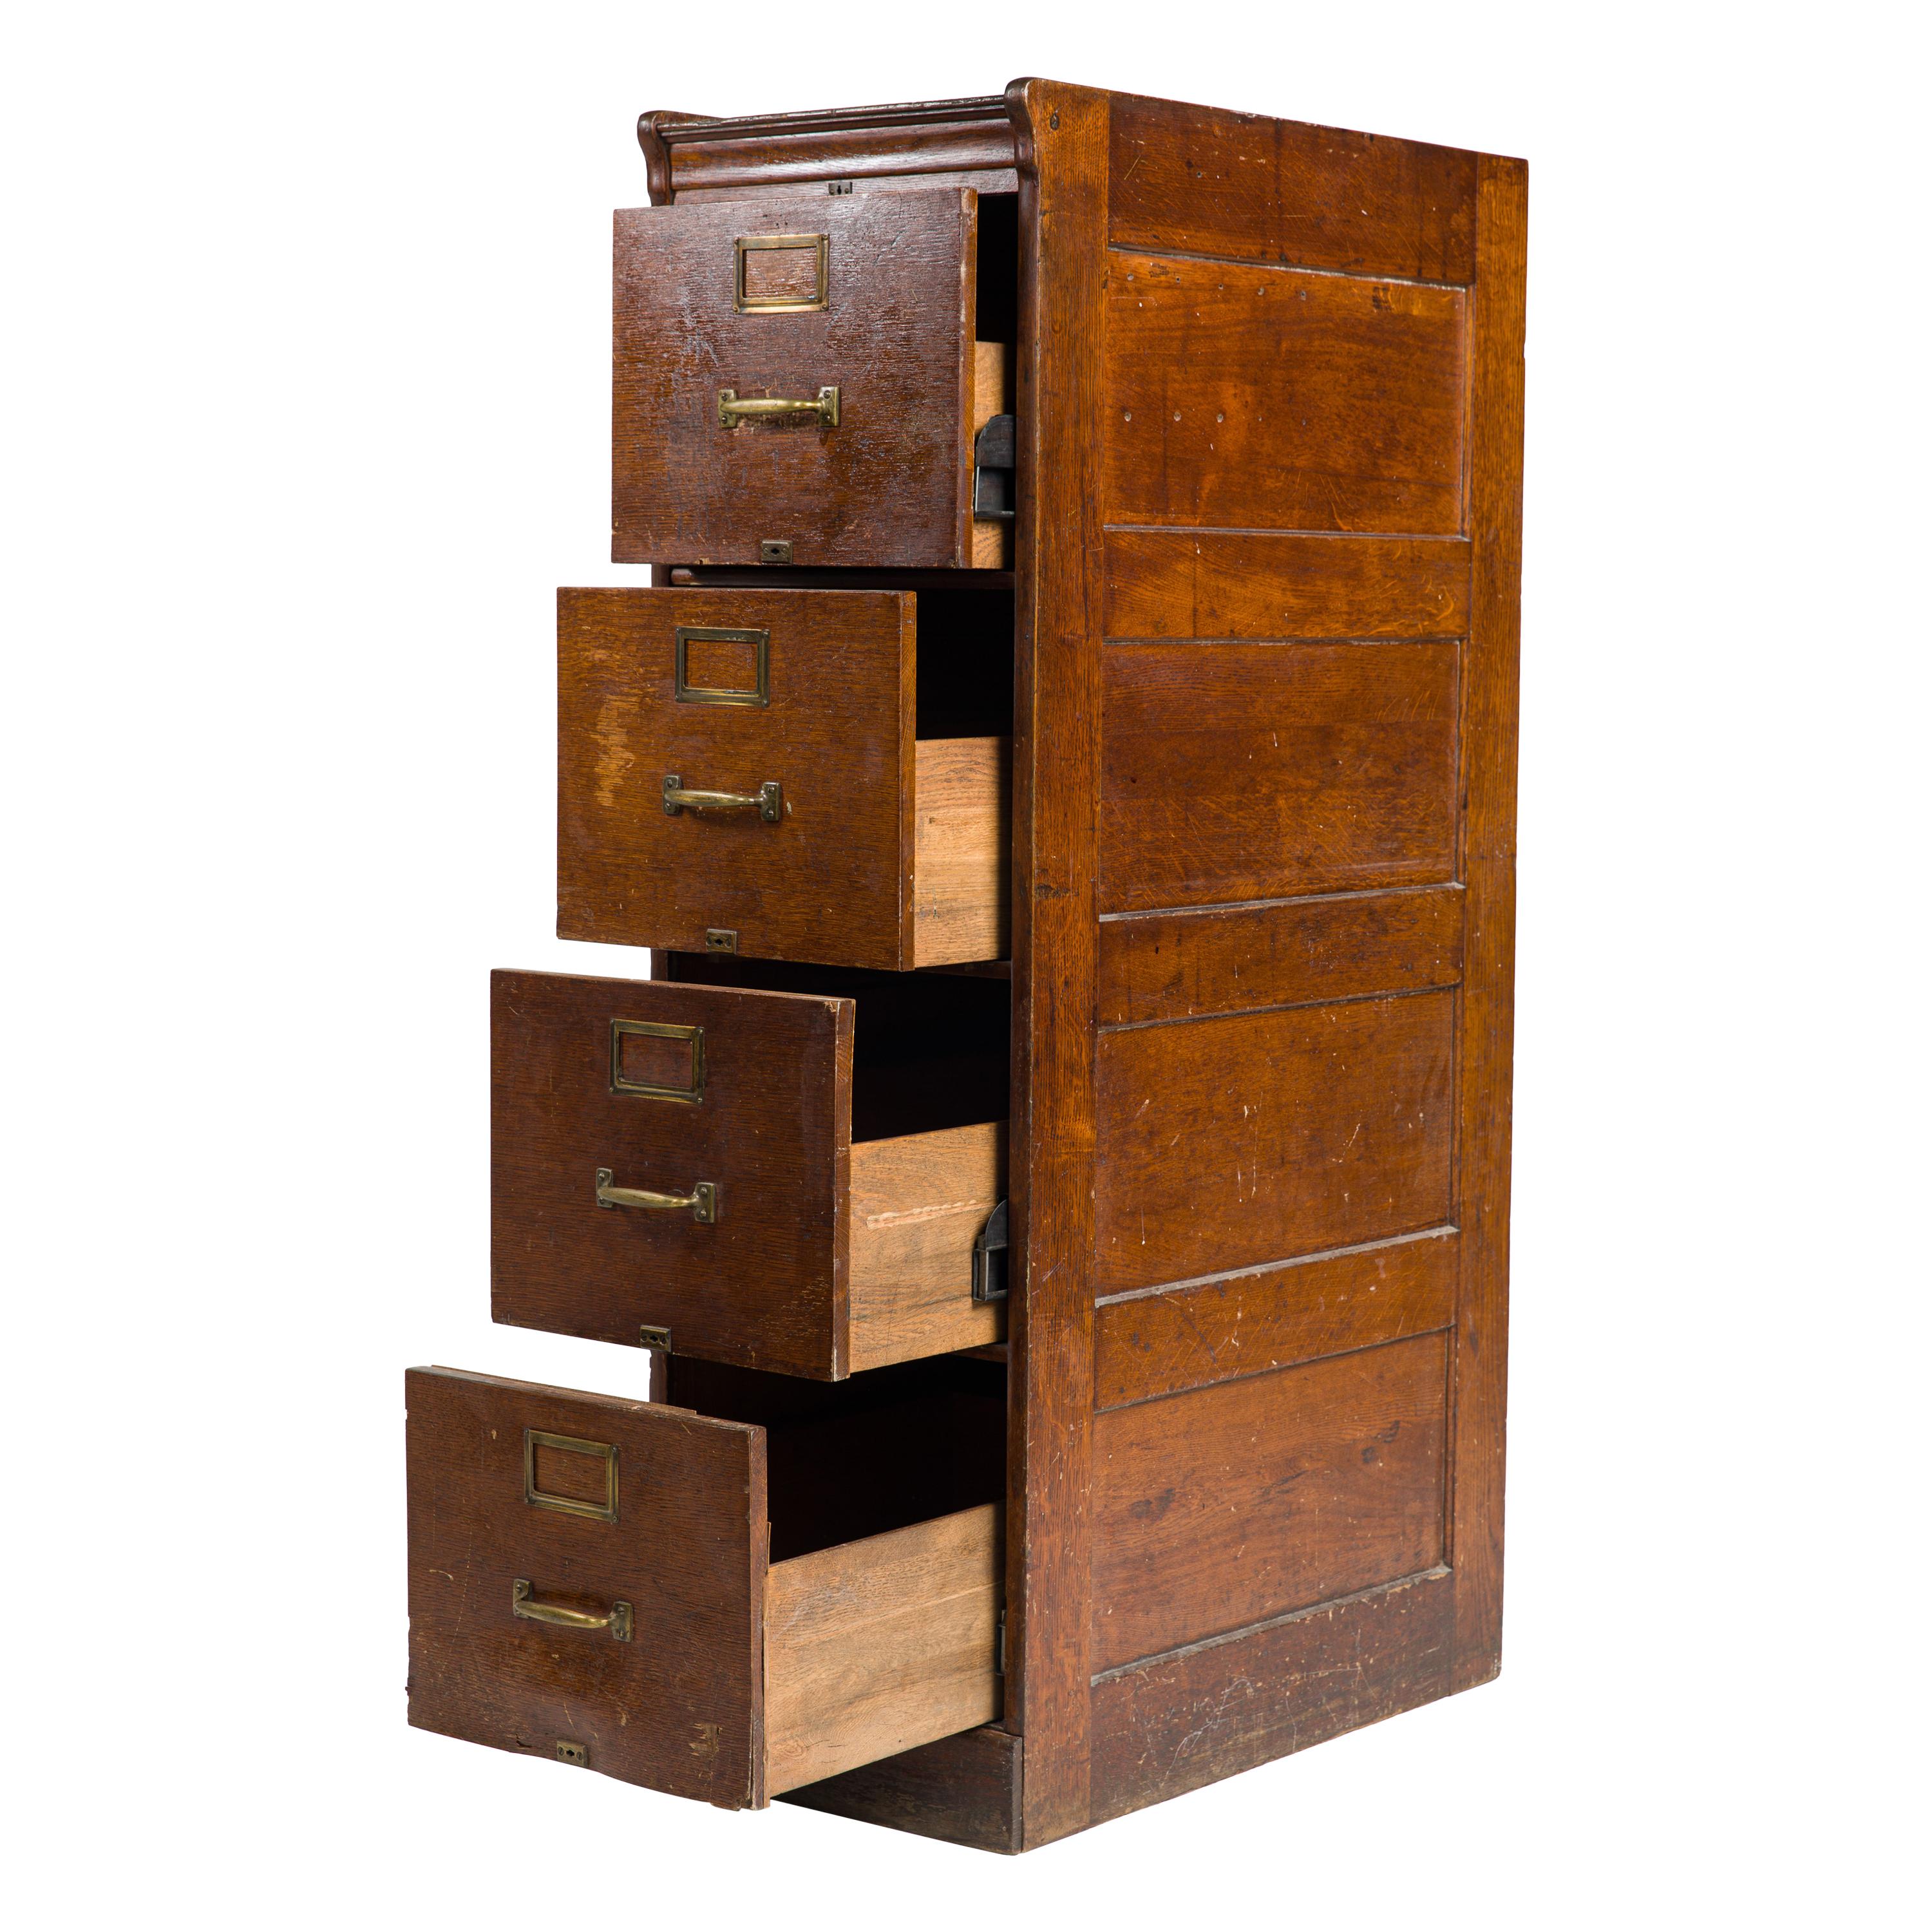 File Cabinet of Massively Stained Oak with Four Drawers Vintage Office Furniture